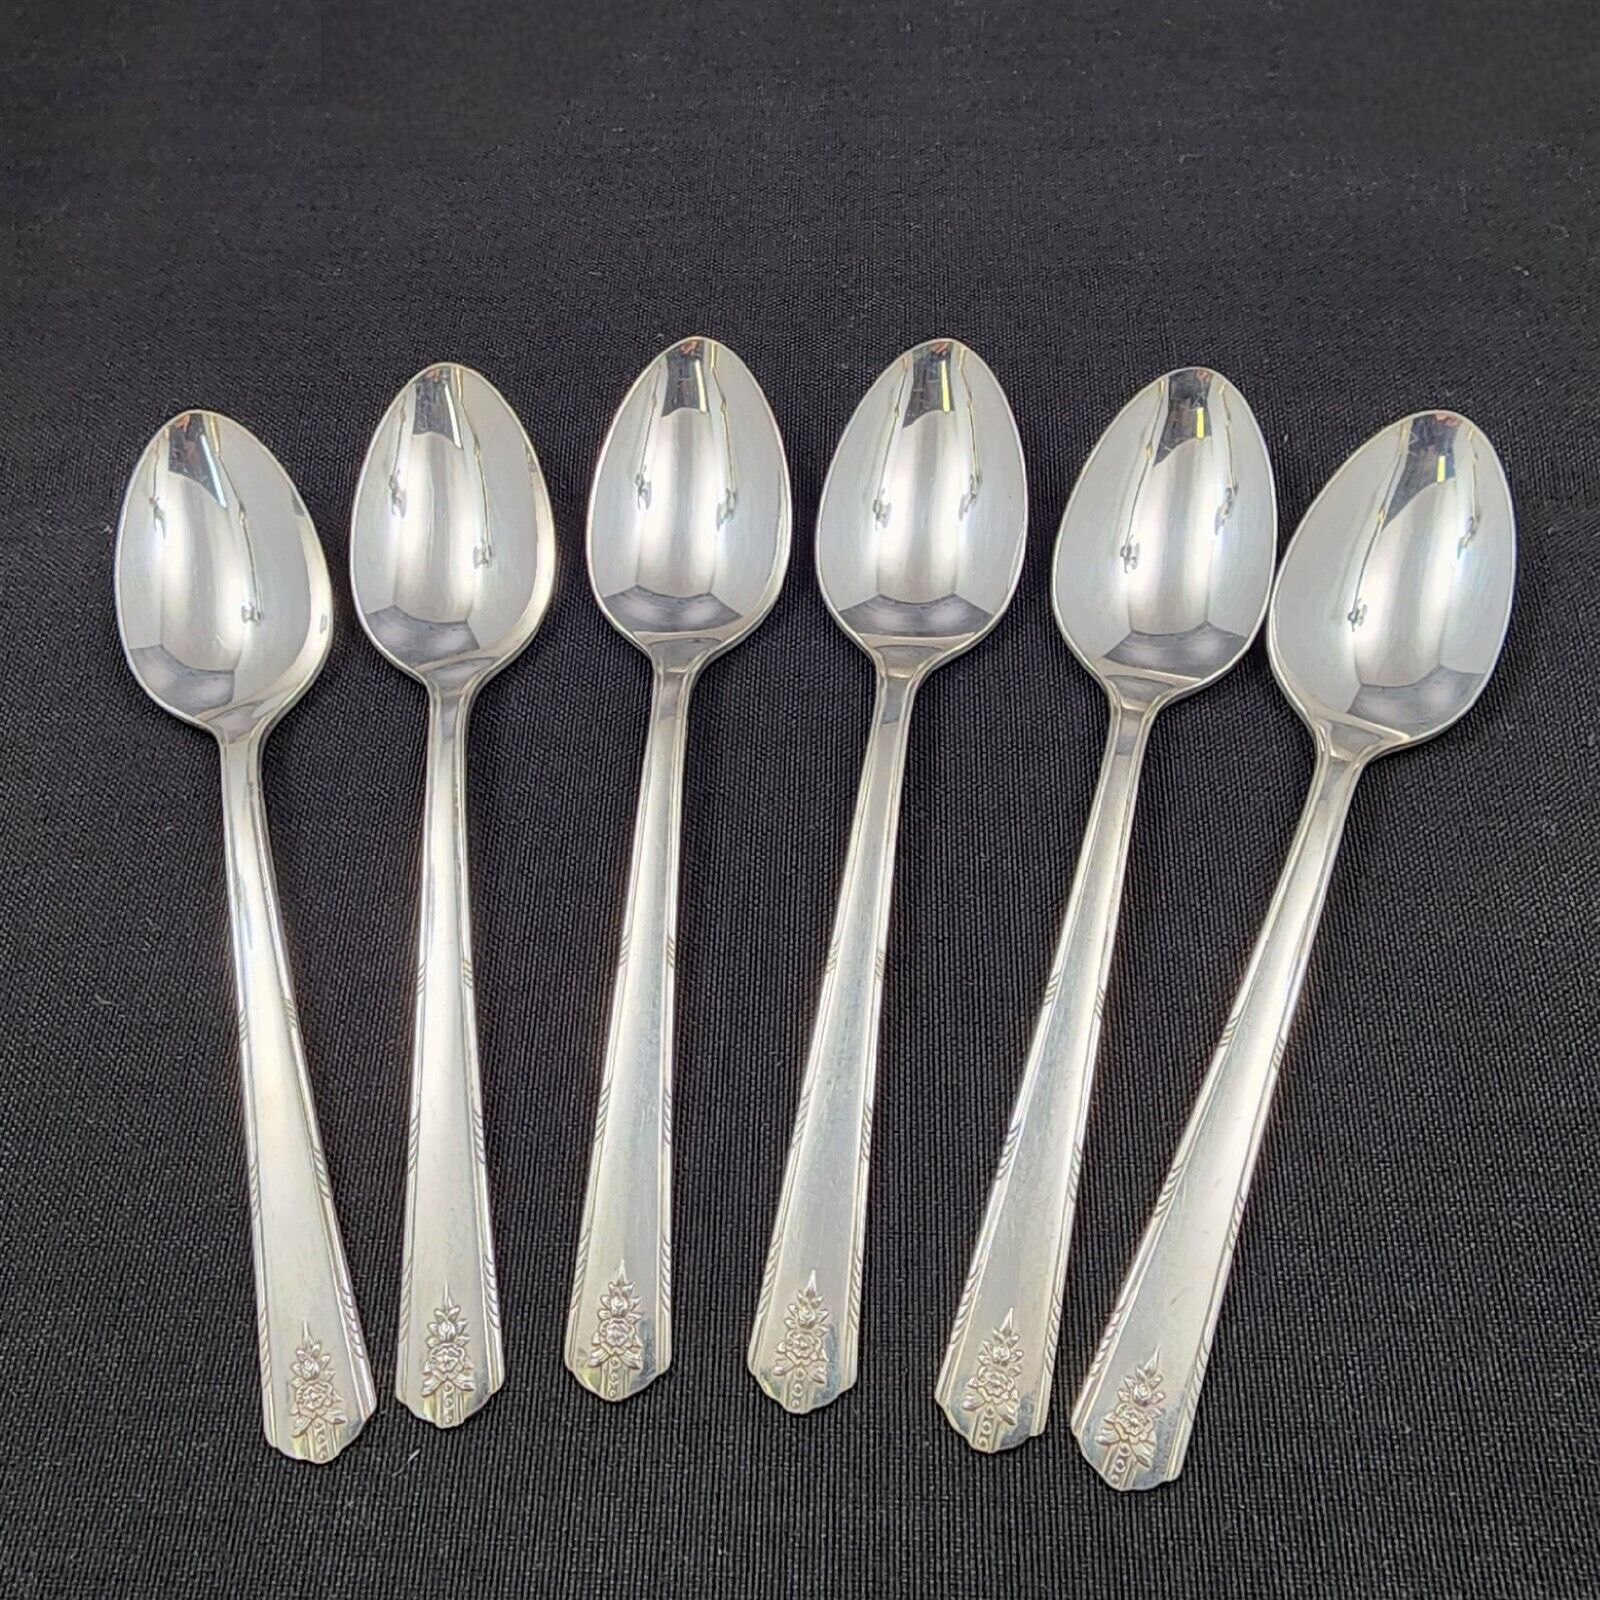 Primary image for Oneida Community Soup Spoons Set of 6 Linda 1949 Silverplated Spoon